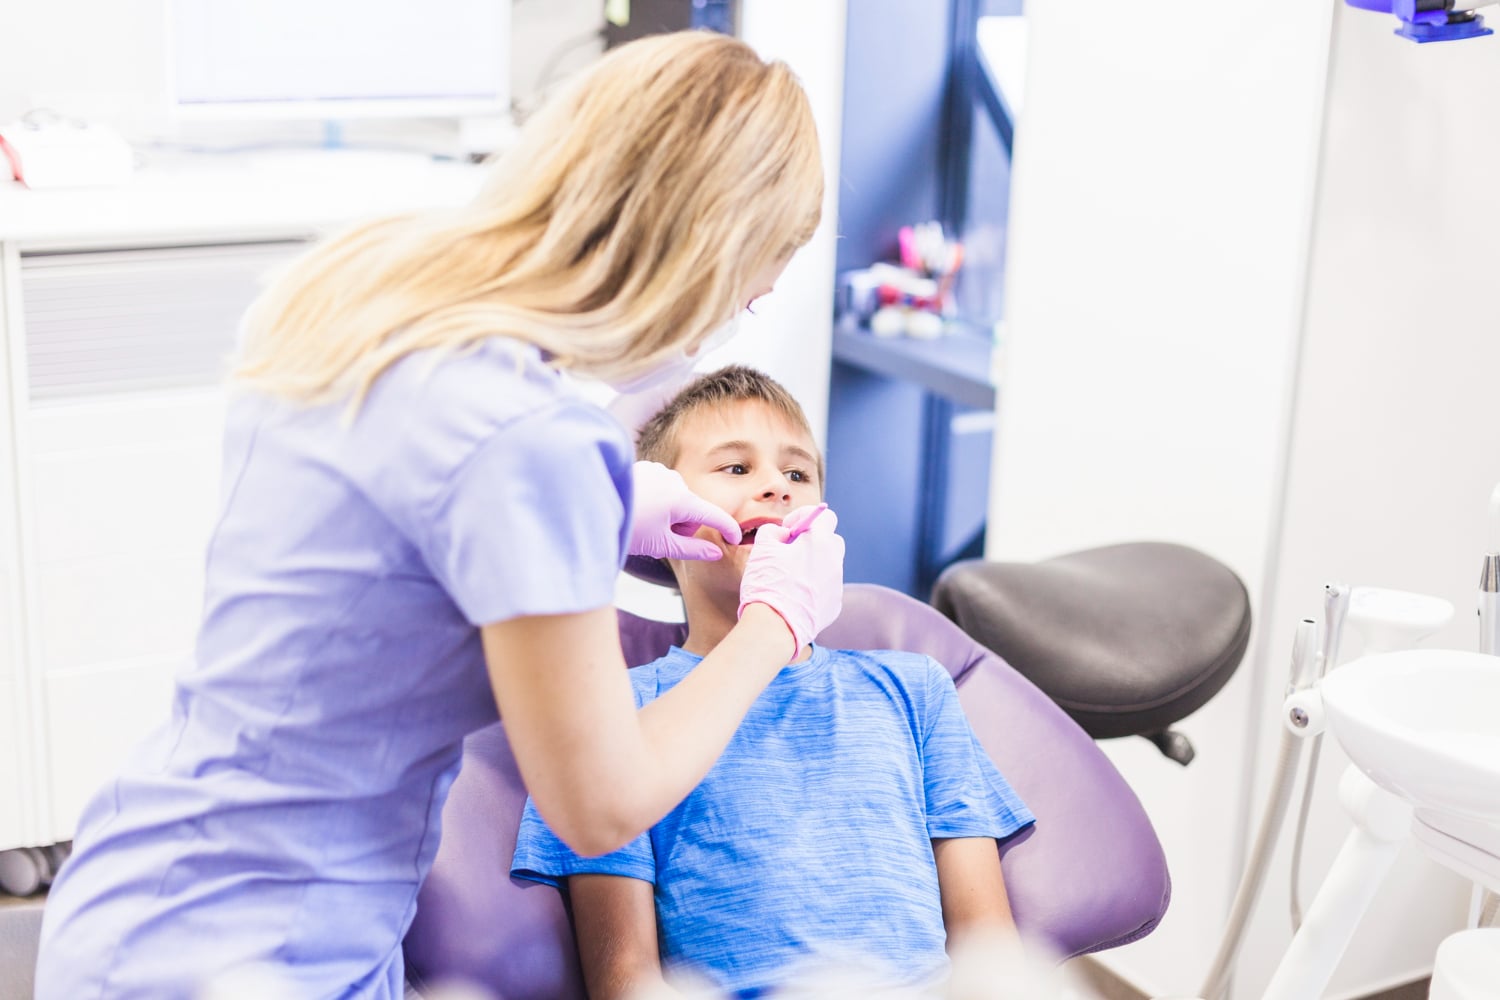 Featured image for “Parent’s Guide to Pediatric Dental Emergencies”